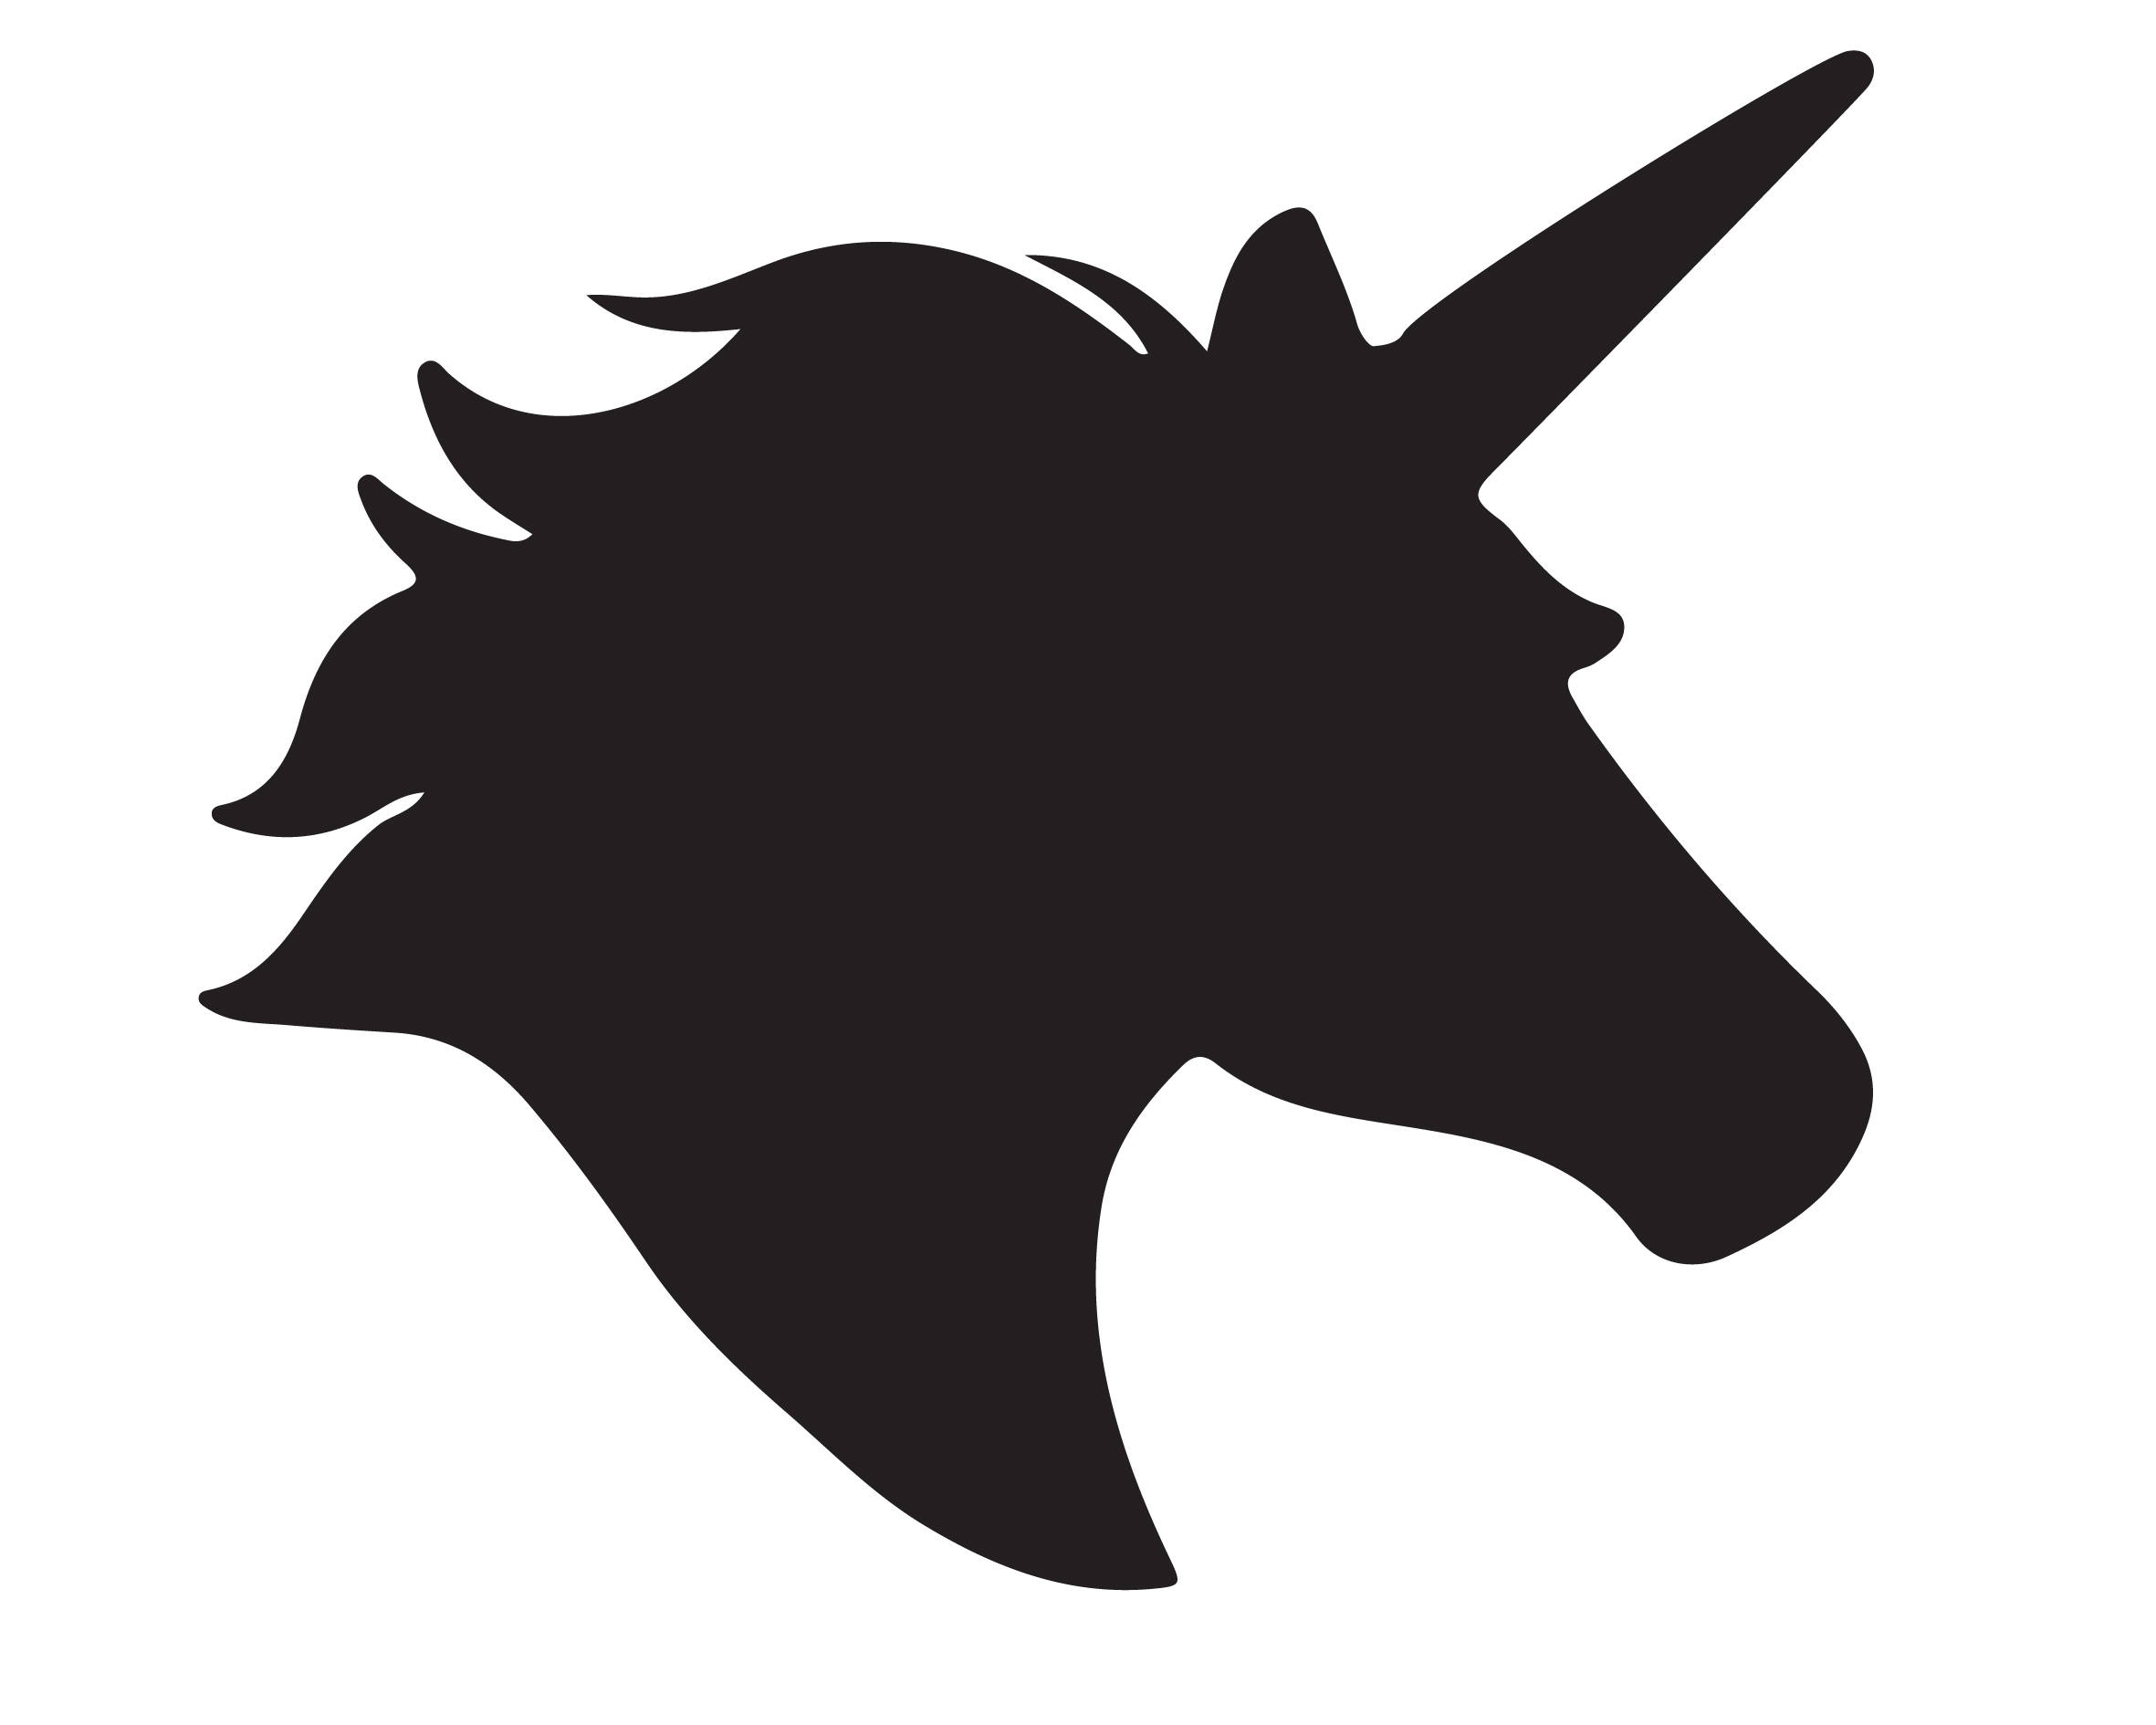 Unicorn Silhouette Images at GetDrawings Free download